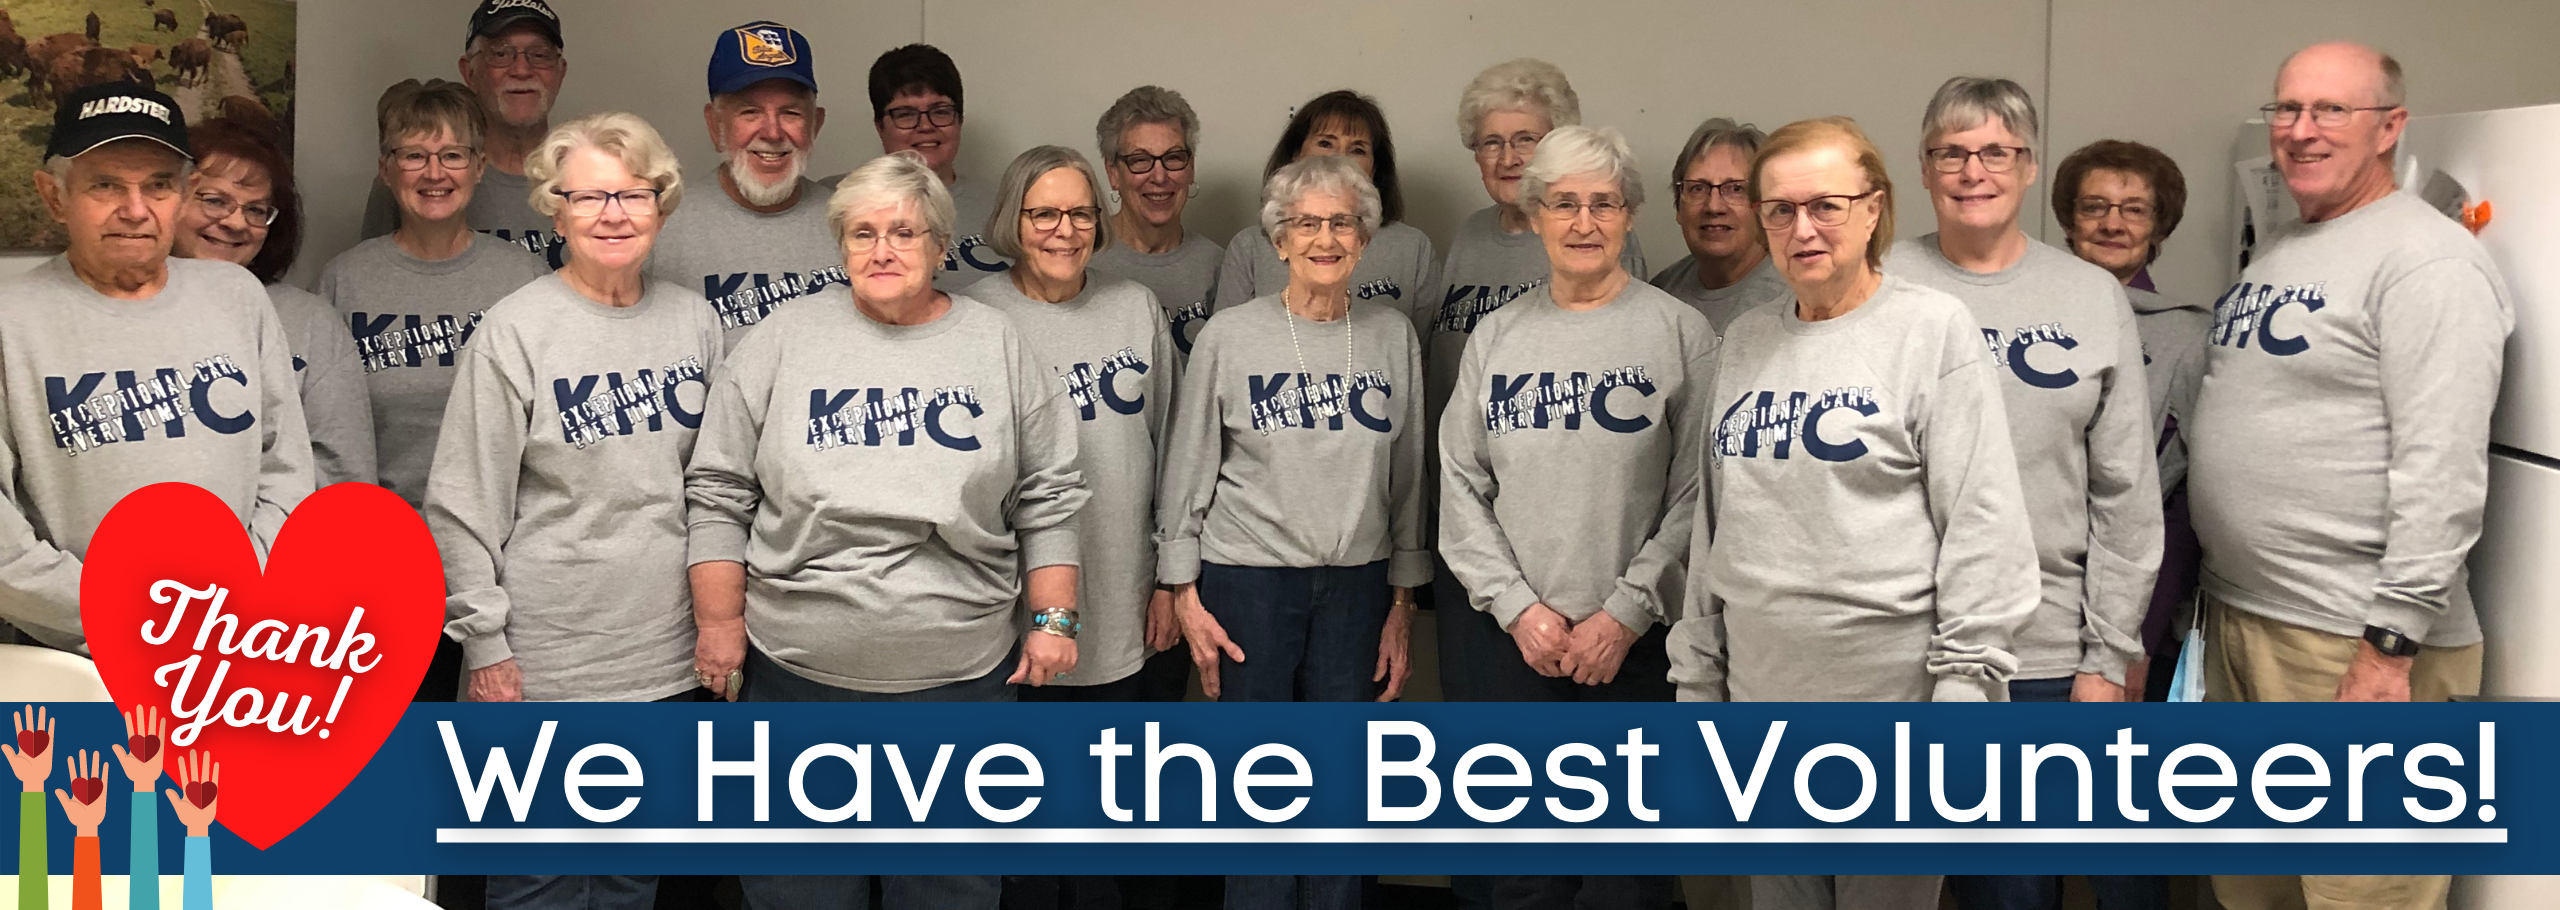 Banner picture of Kingman Healthcare Center Volunteers. 
There is a group of elderly Volunteers wearing matching long sleeve shirts that says, "KHC- EXCEPTIONAL CARE. EVERY TIME." There is 15 females and 4 males smiling.

There is a small banner across the bottom of the picture that says "We Have the Best Volunteers!" 

Graphic to the left of banner of 4 rising hands with a heart on each hand and a large heart next to the hands that says "Thank You!"